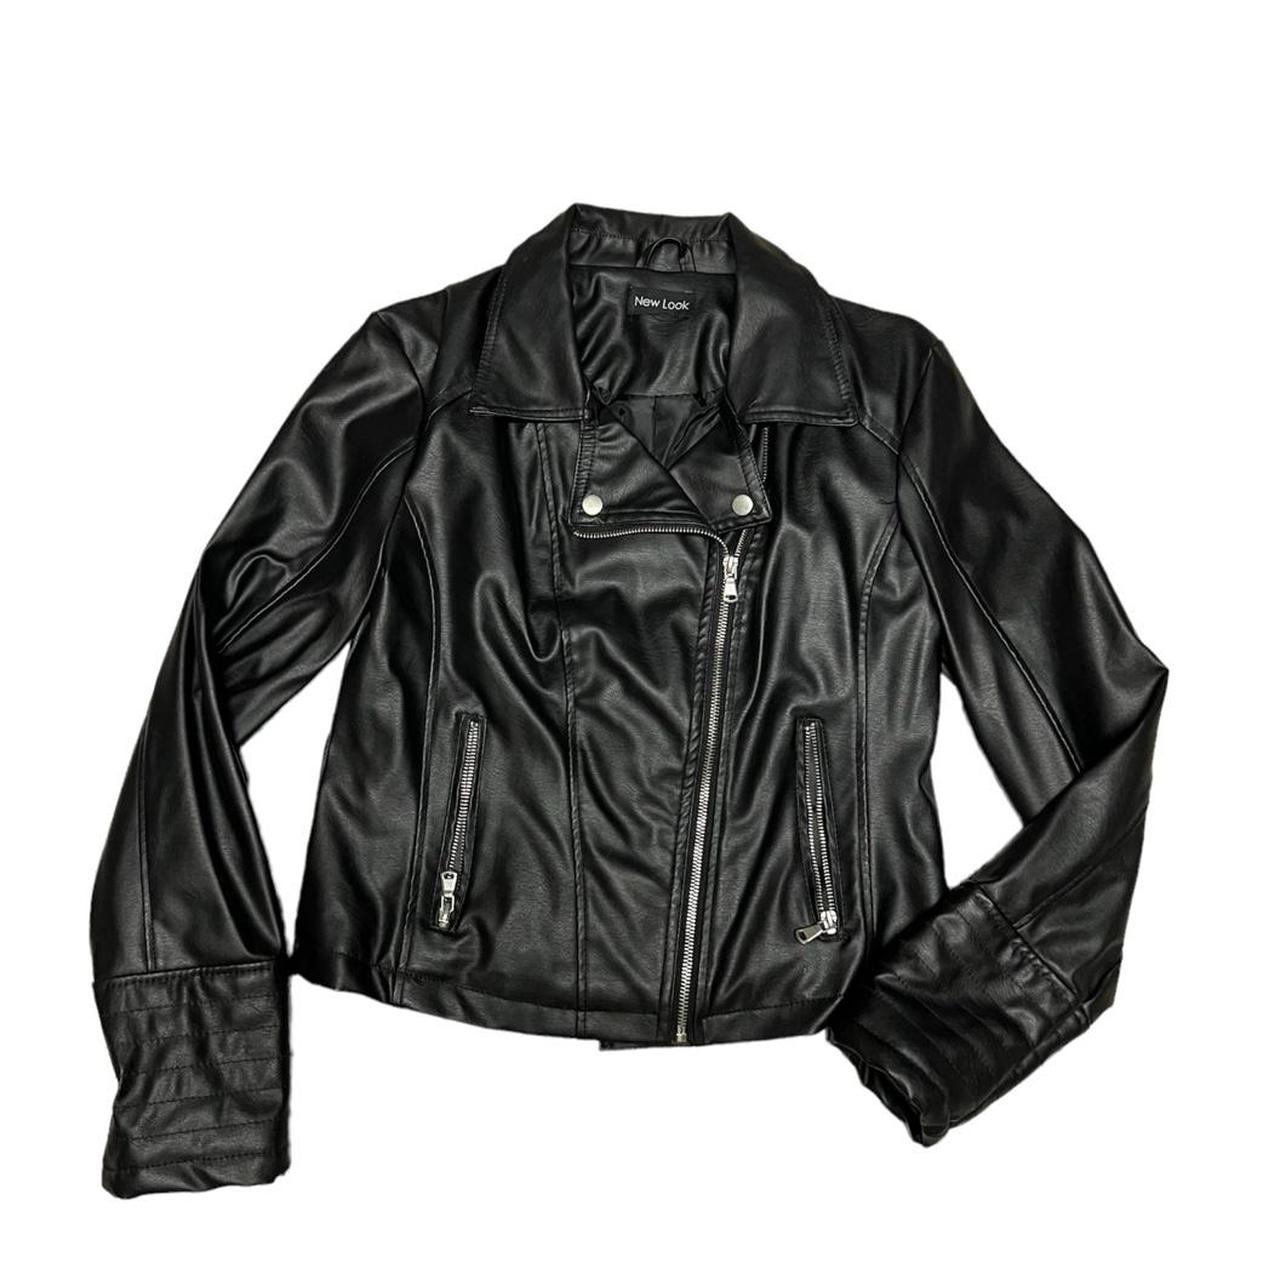 Product Image 2 - New Look Black Faux Leather